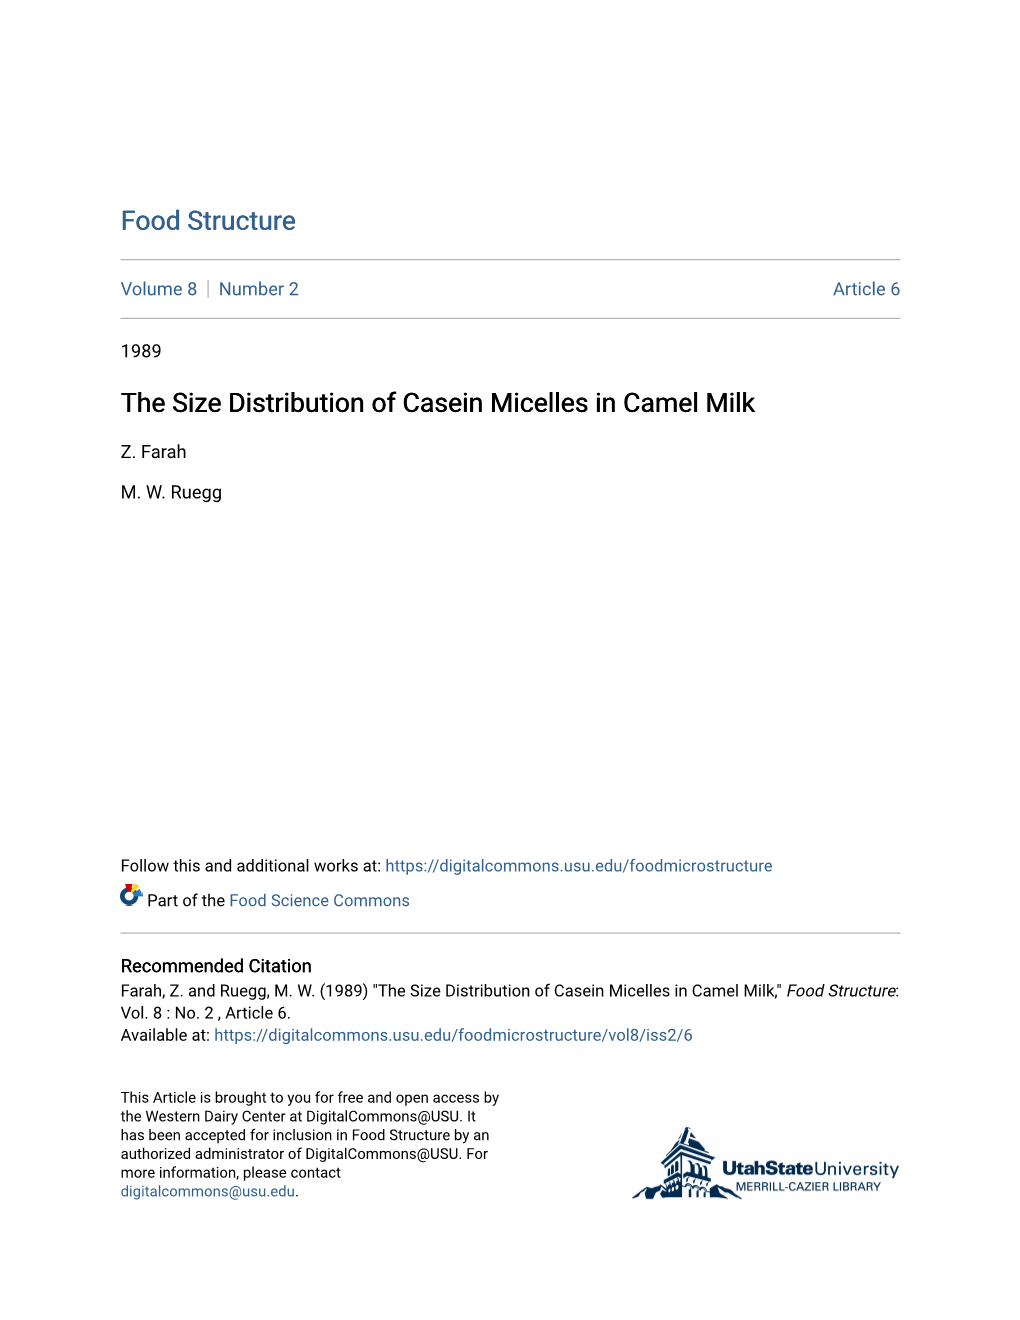 The Size Distribution of Casein Micelles in Camel Milk